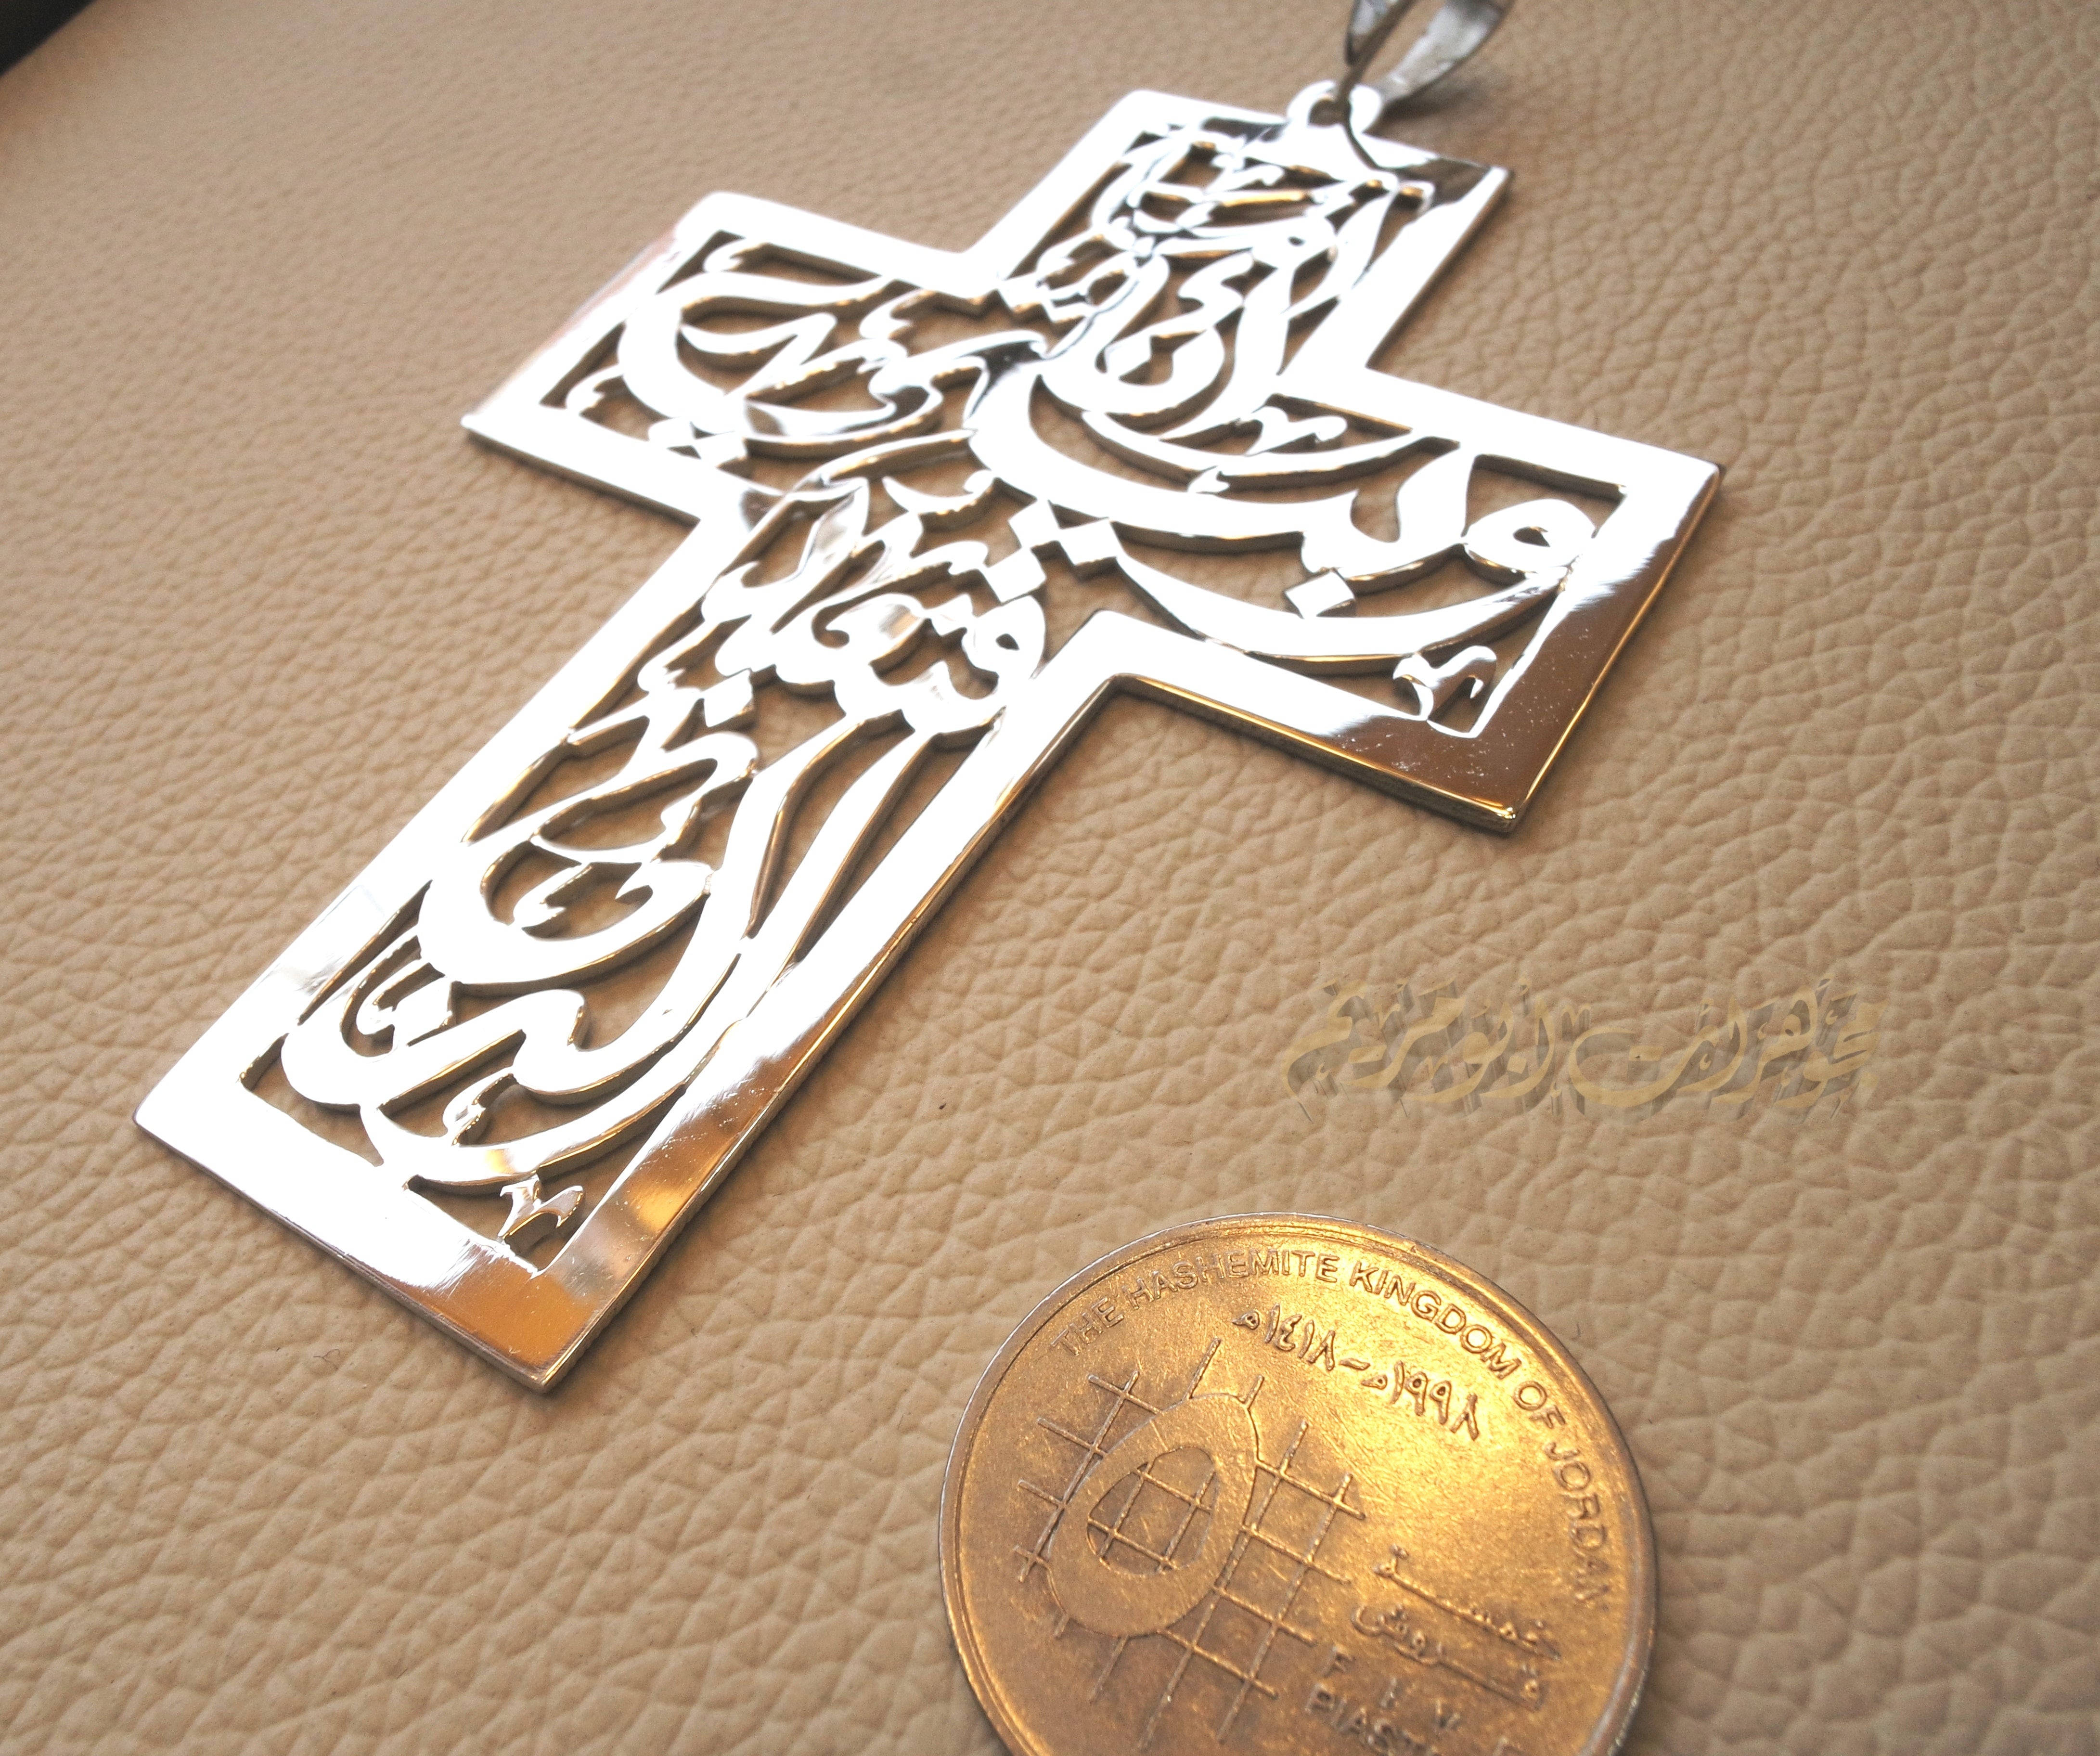 Very huge Arabic calligraphy cross necklace 2 sterling silver 925 jewelry catholic orthodox christianity handmade heavy thick fast shipping